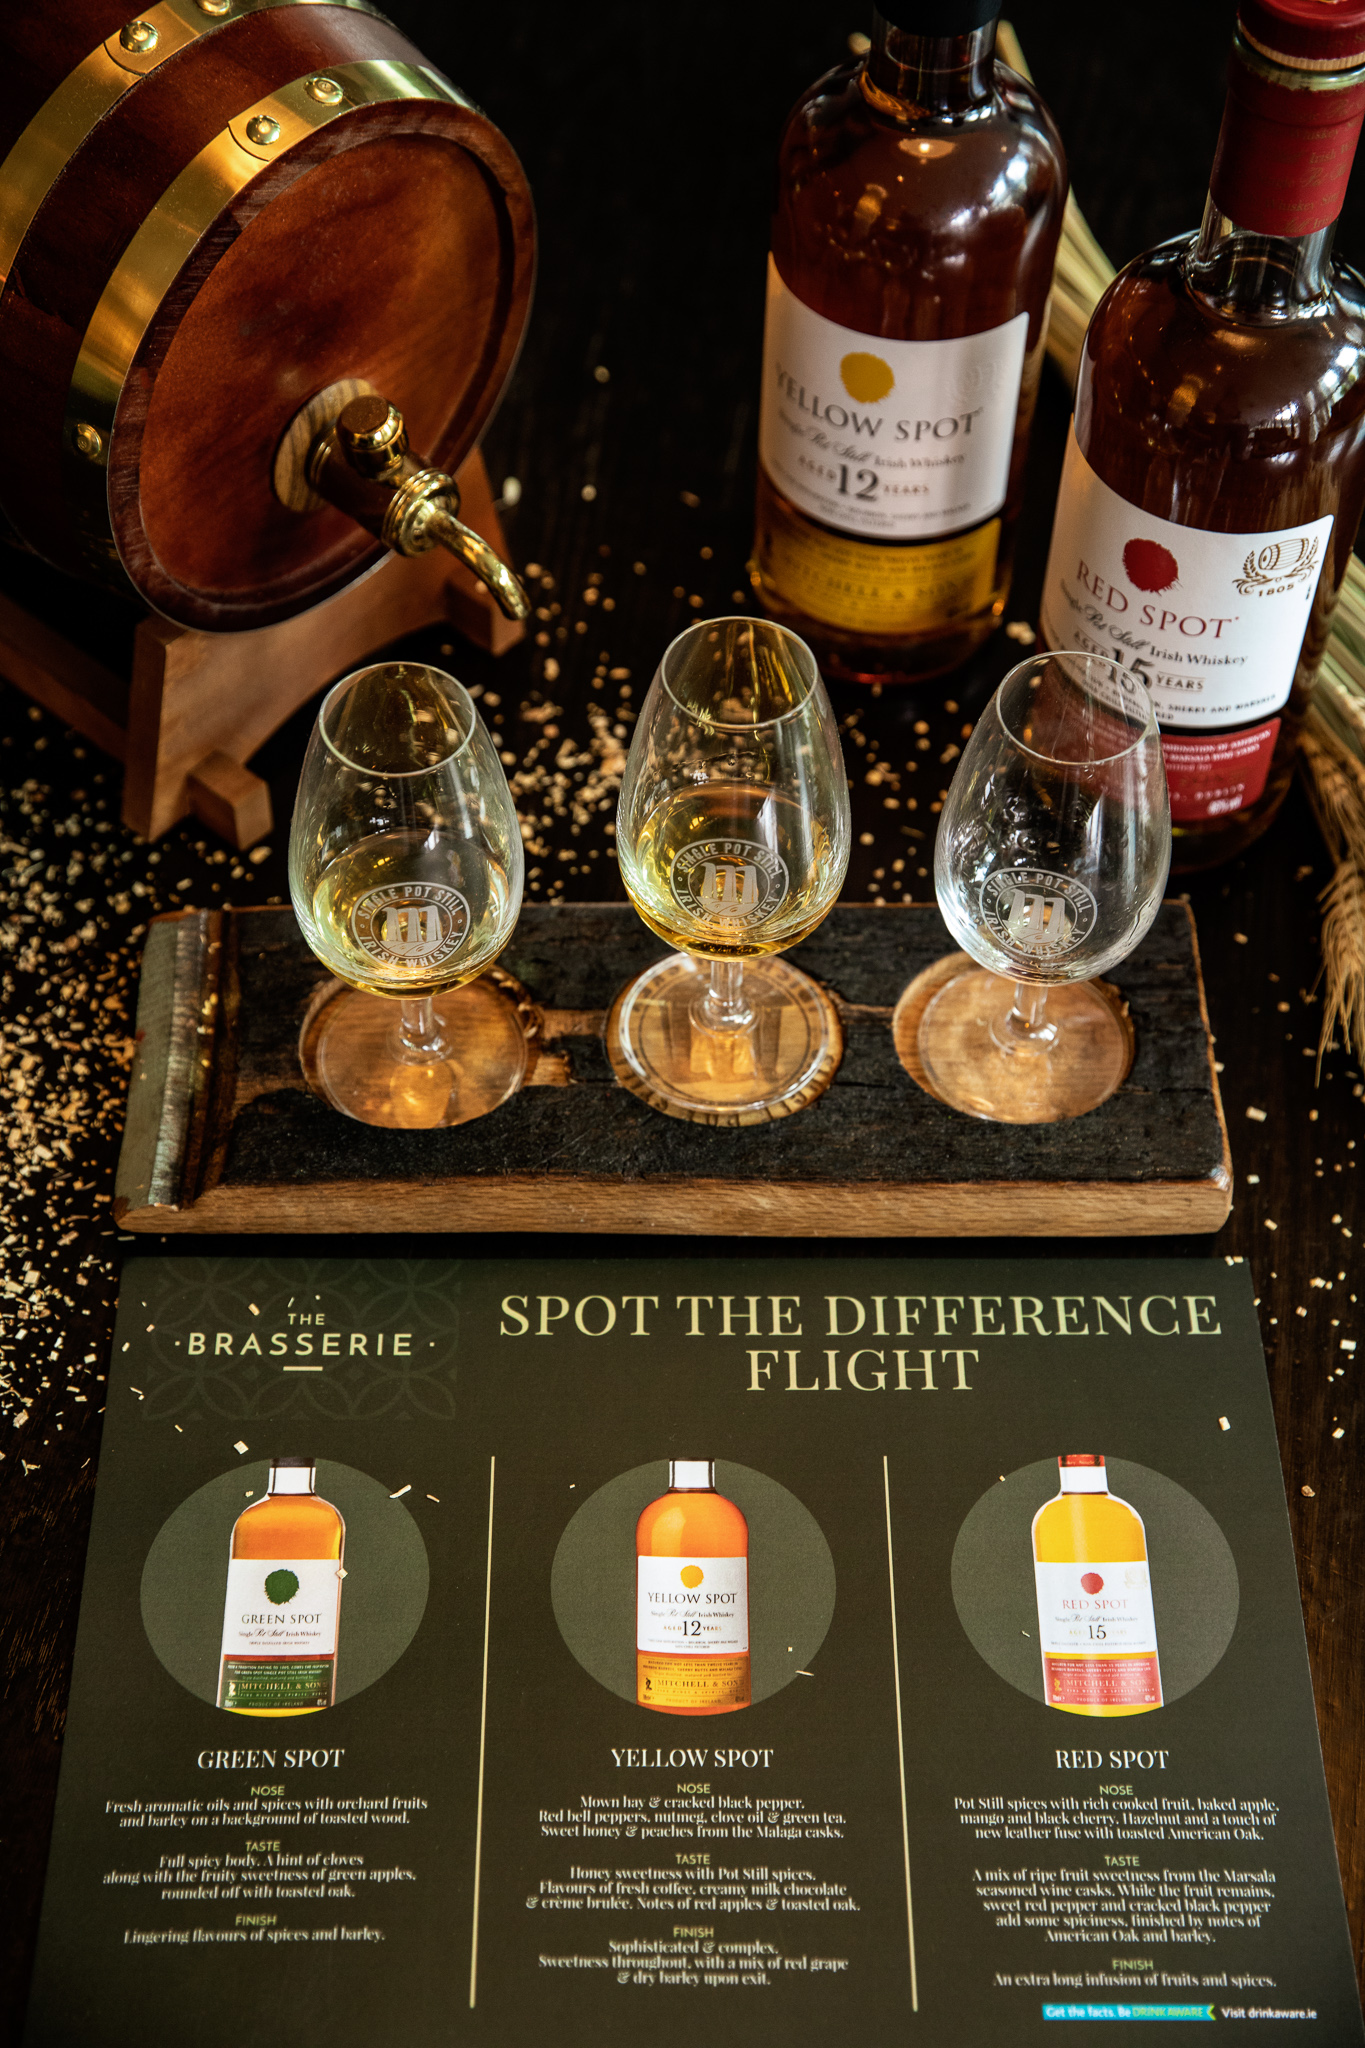 Experiences with Flight tasting